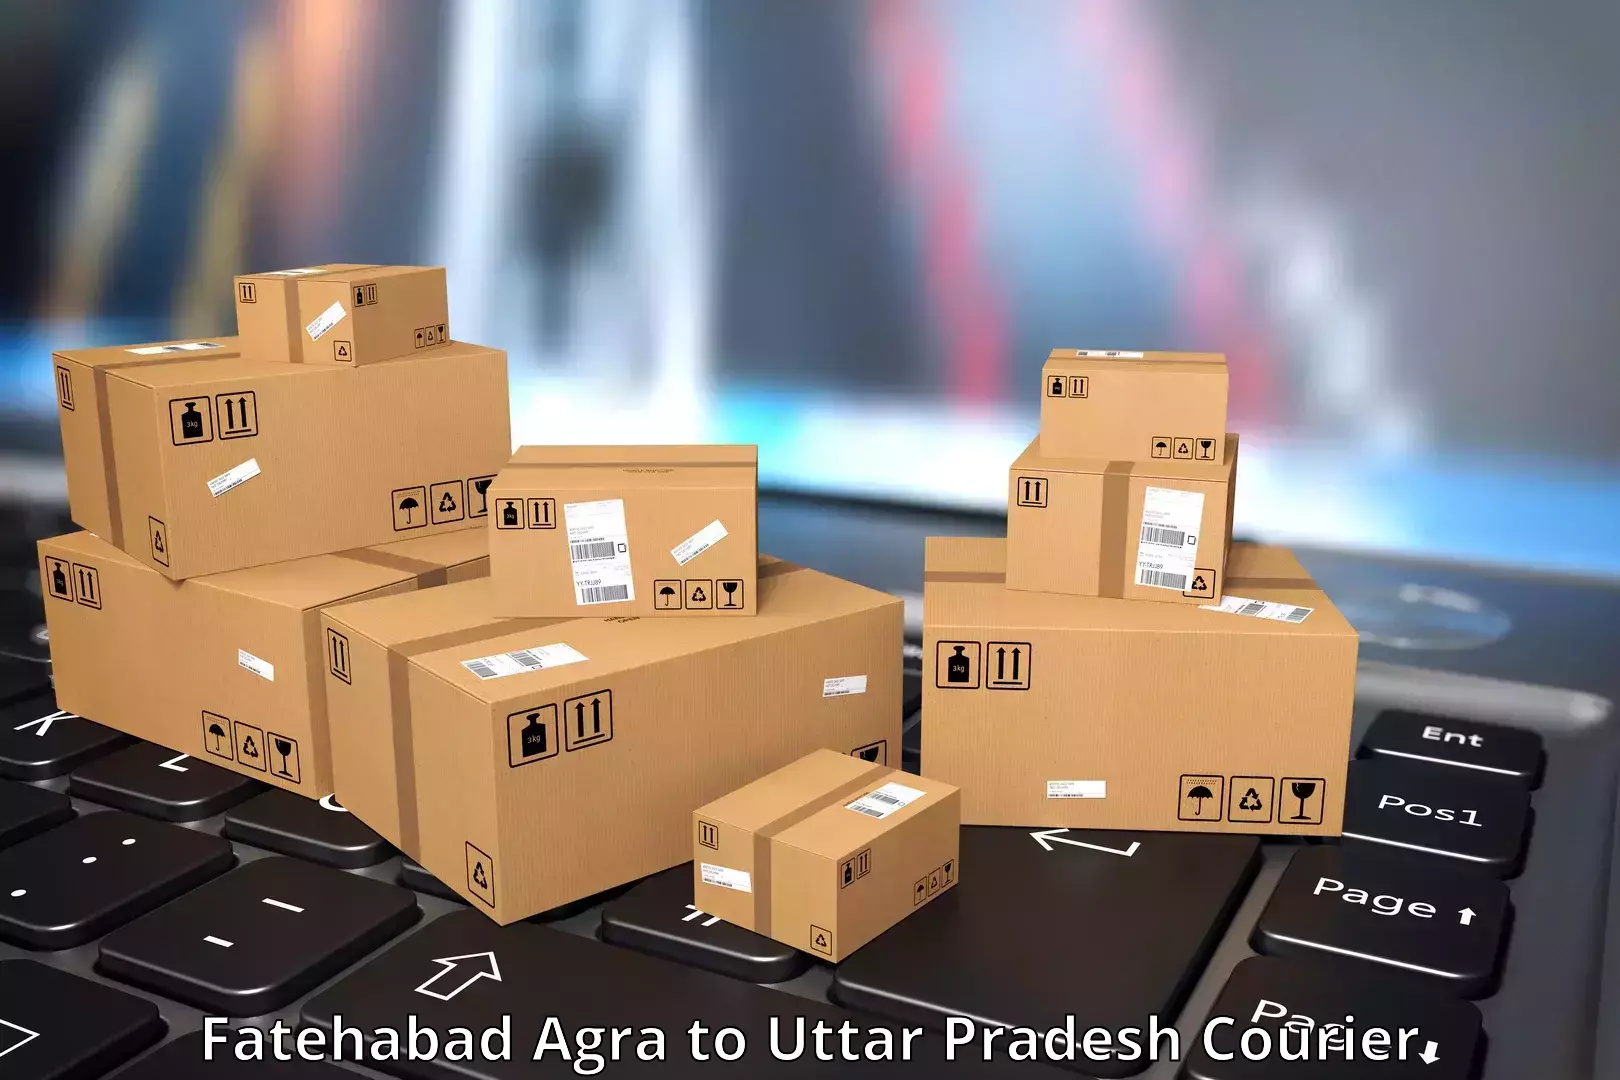 State-of-the-art courier technology Fatehabad Agra to Uttar Pradesh